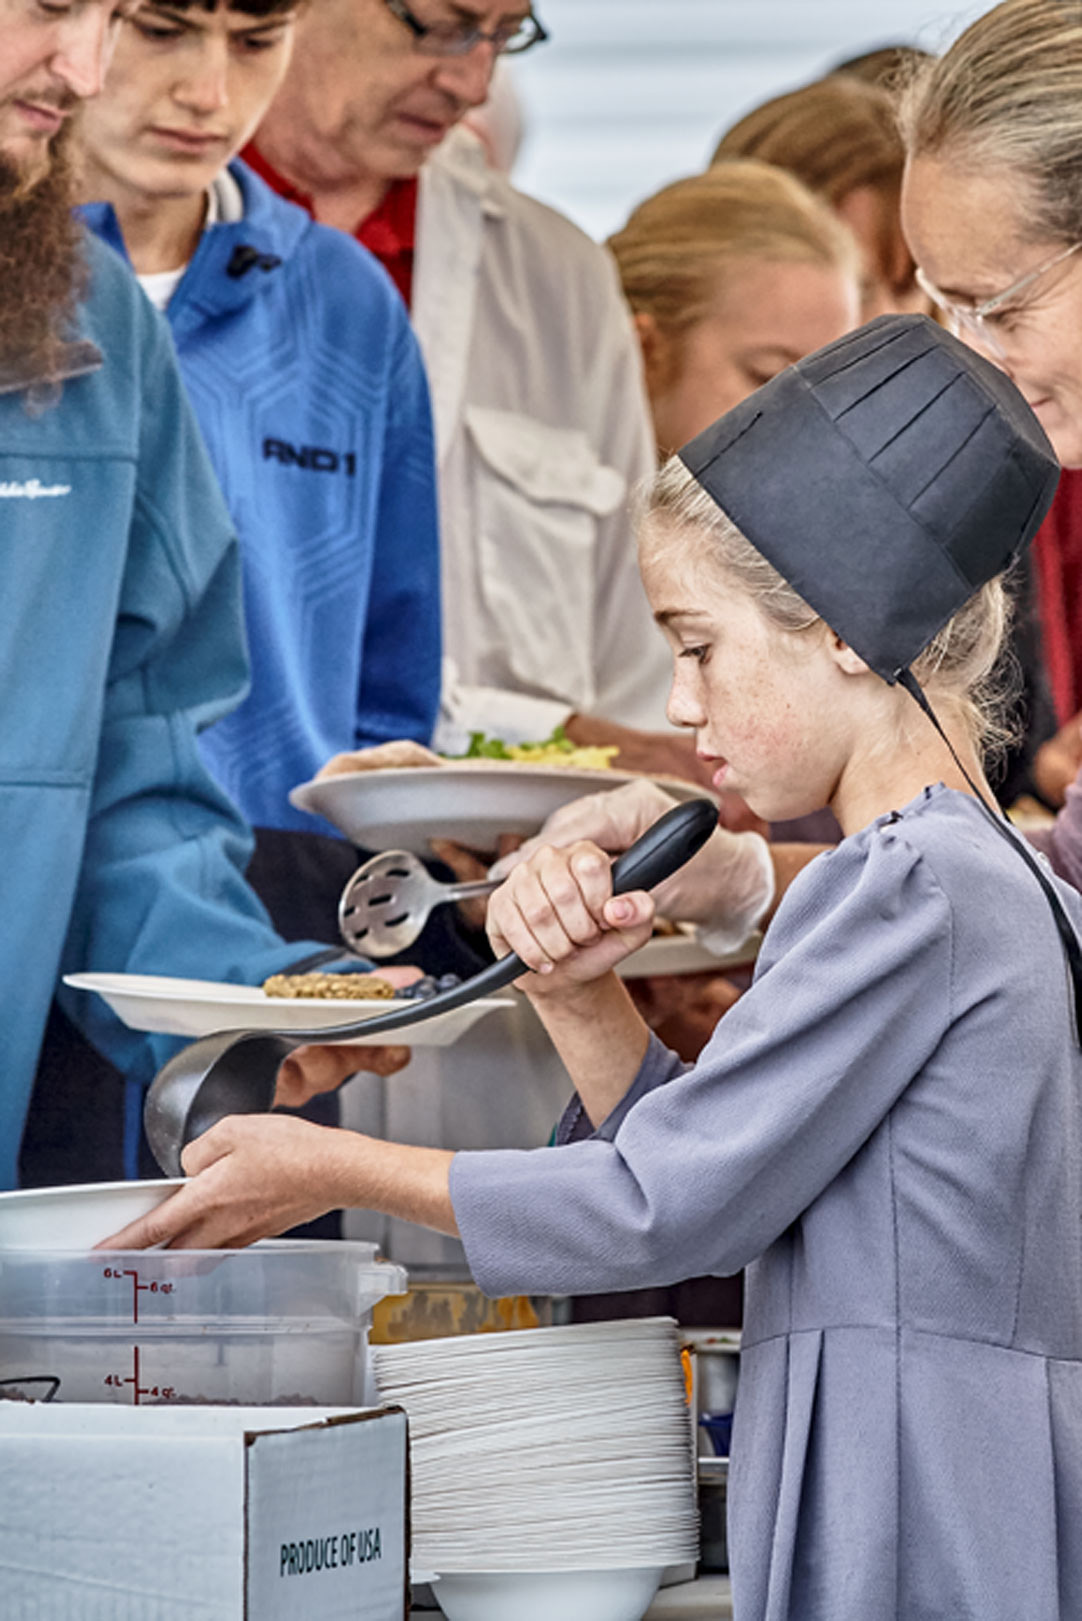 Lifestyle Portrait At West Salem Mission Campmeeting Focus On Amish Girl Wearing Gray Dress And Black Bonnet Serving Food 